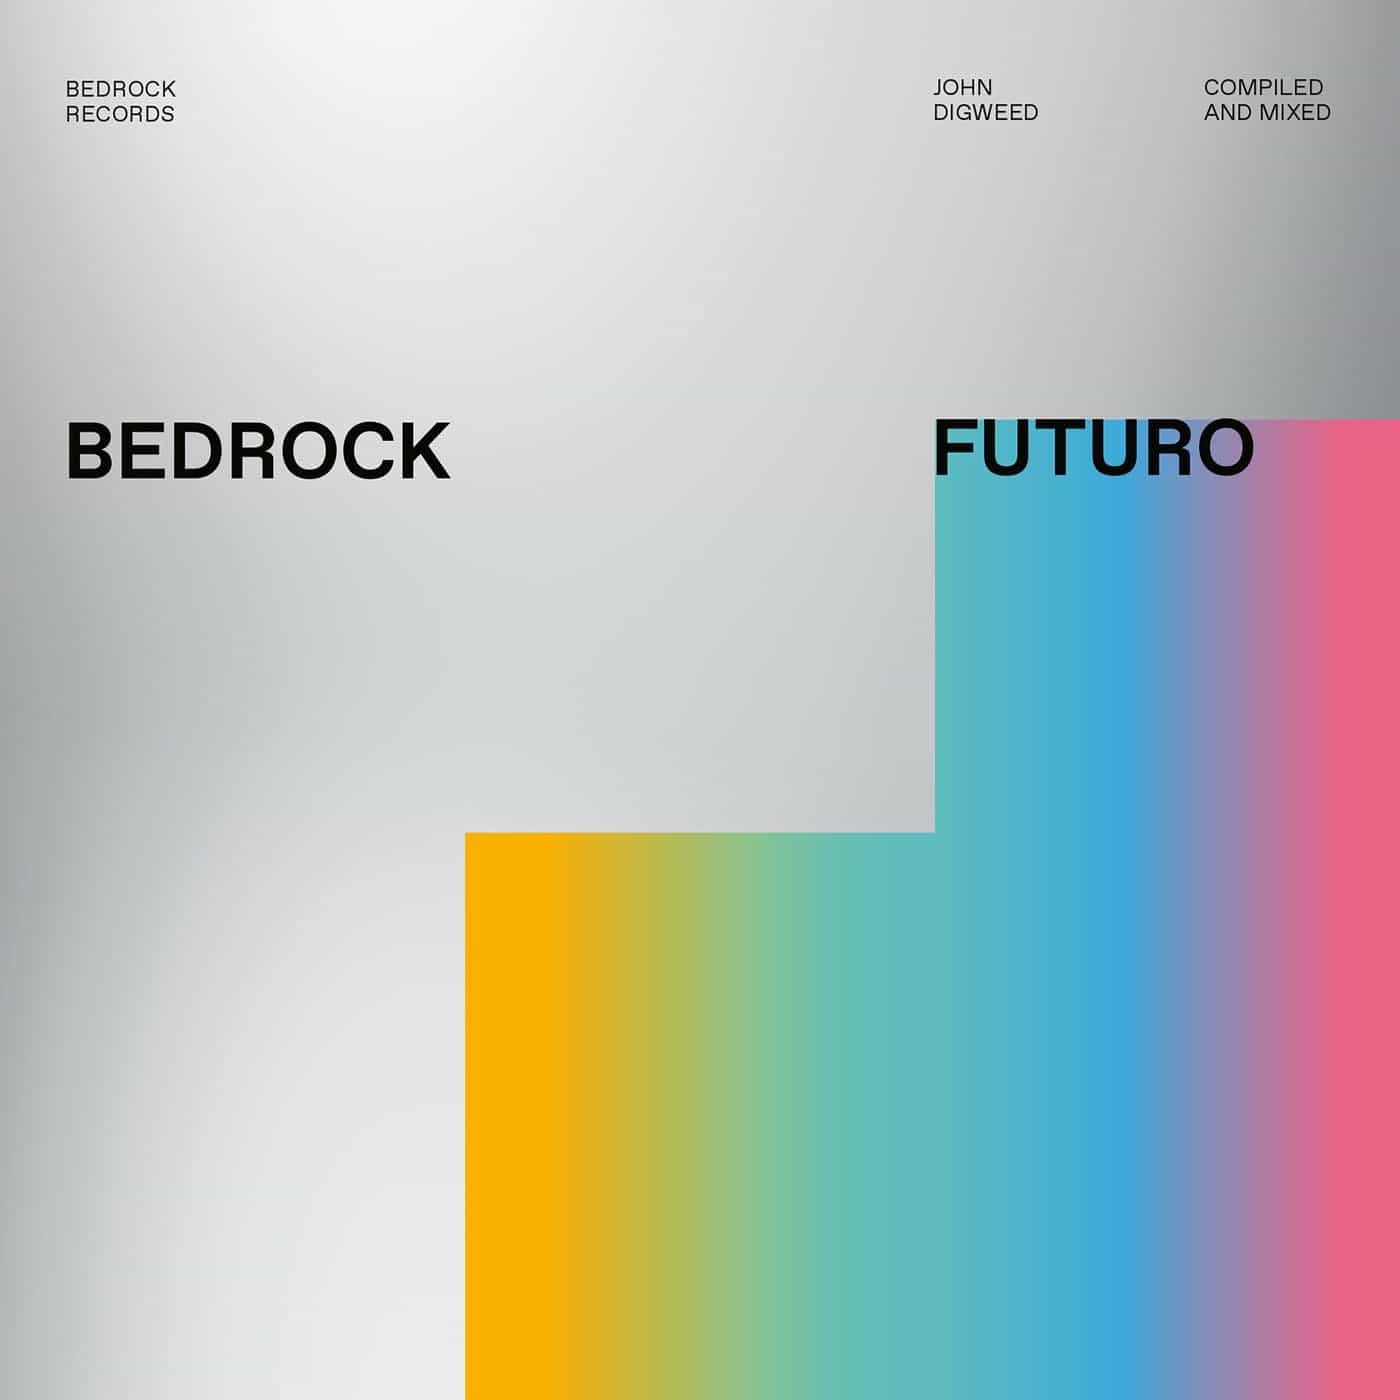 image cover: John Digweed - Futuro (Continuous Mix 1/2) on Bedrock Records